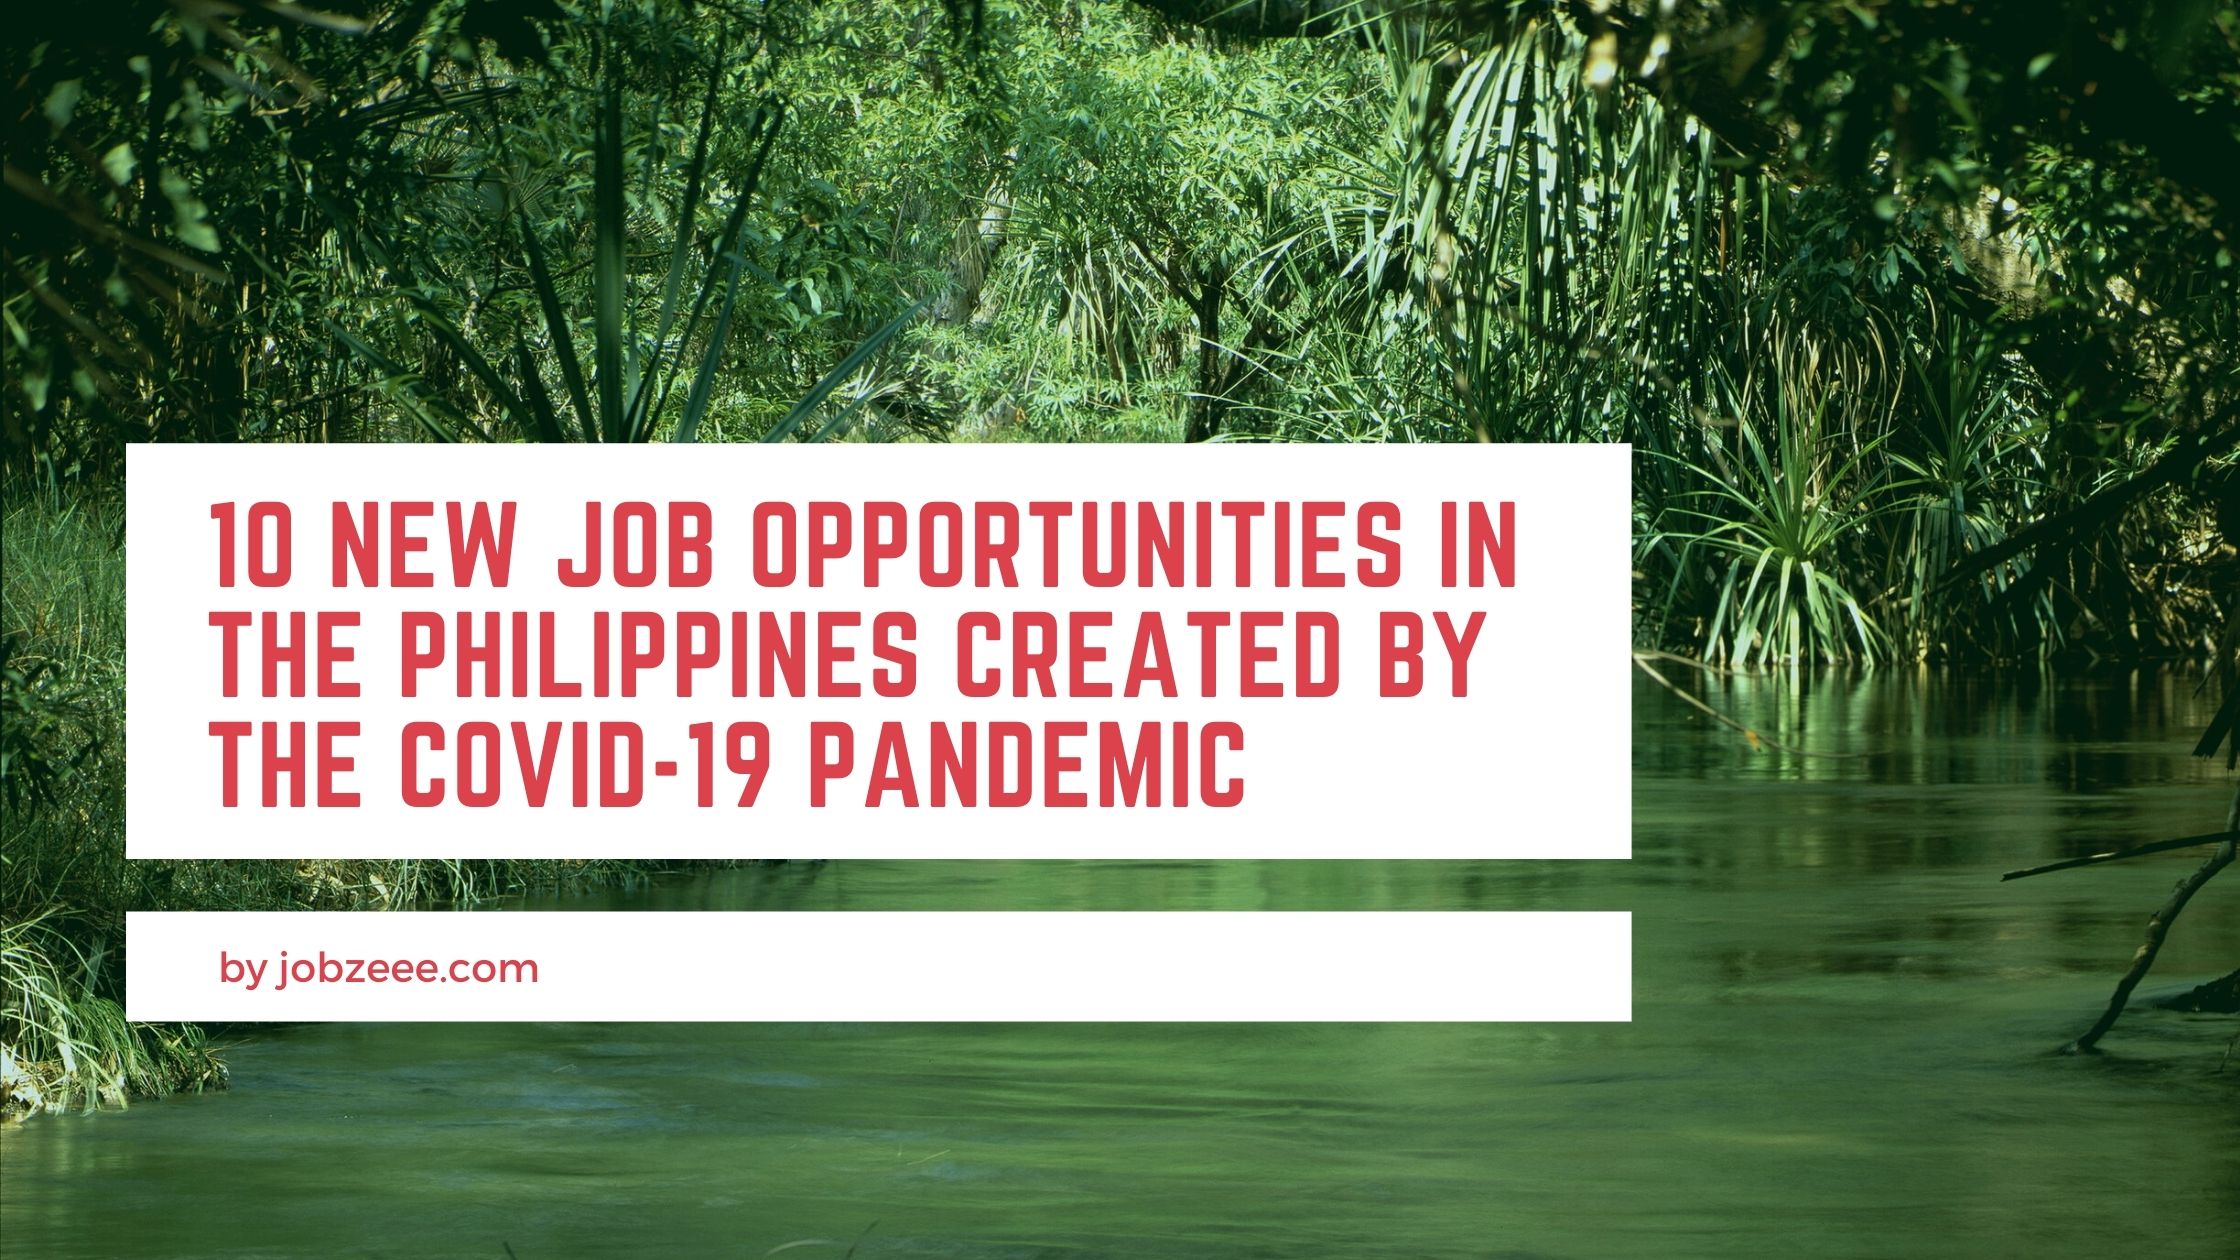 10 New Job Opportunities in the Philippines Created by the COVID-19 Pandemic